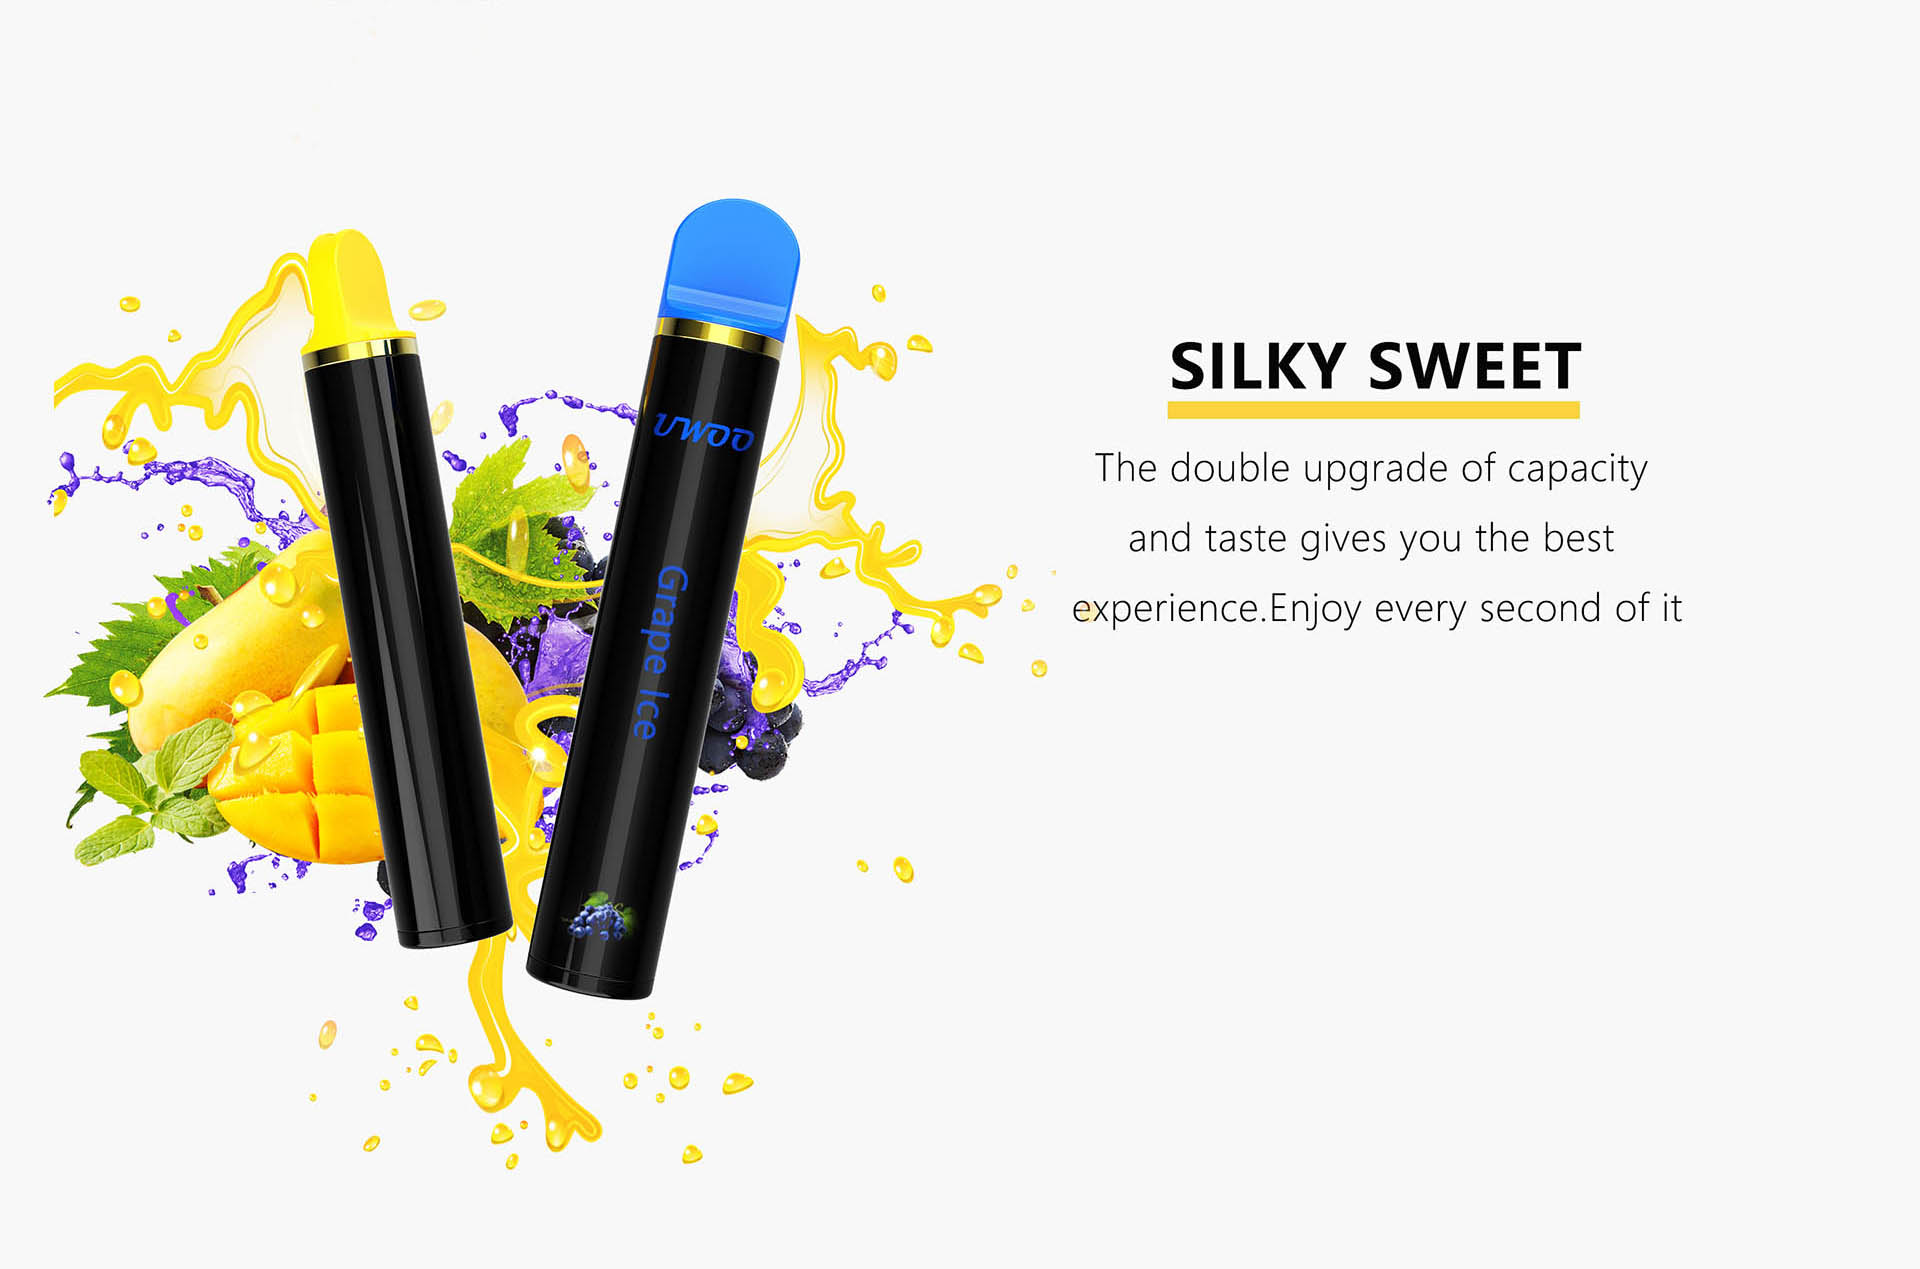 SILKY SWEET The double upgrade of capacity and taste gives you the best experience. Enjoy every second of it